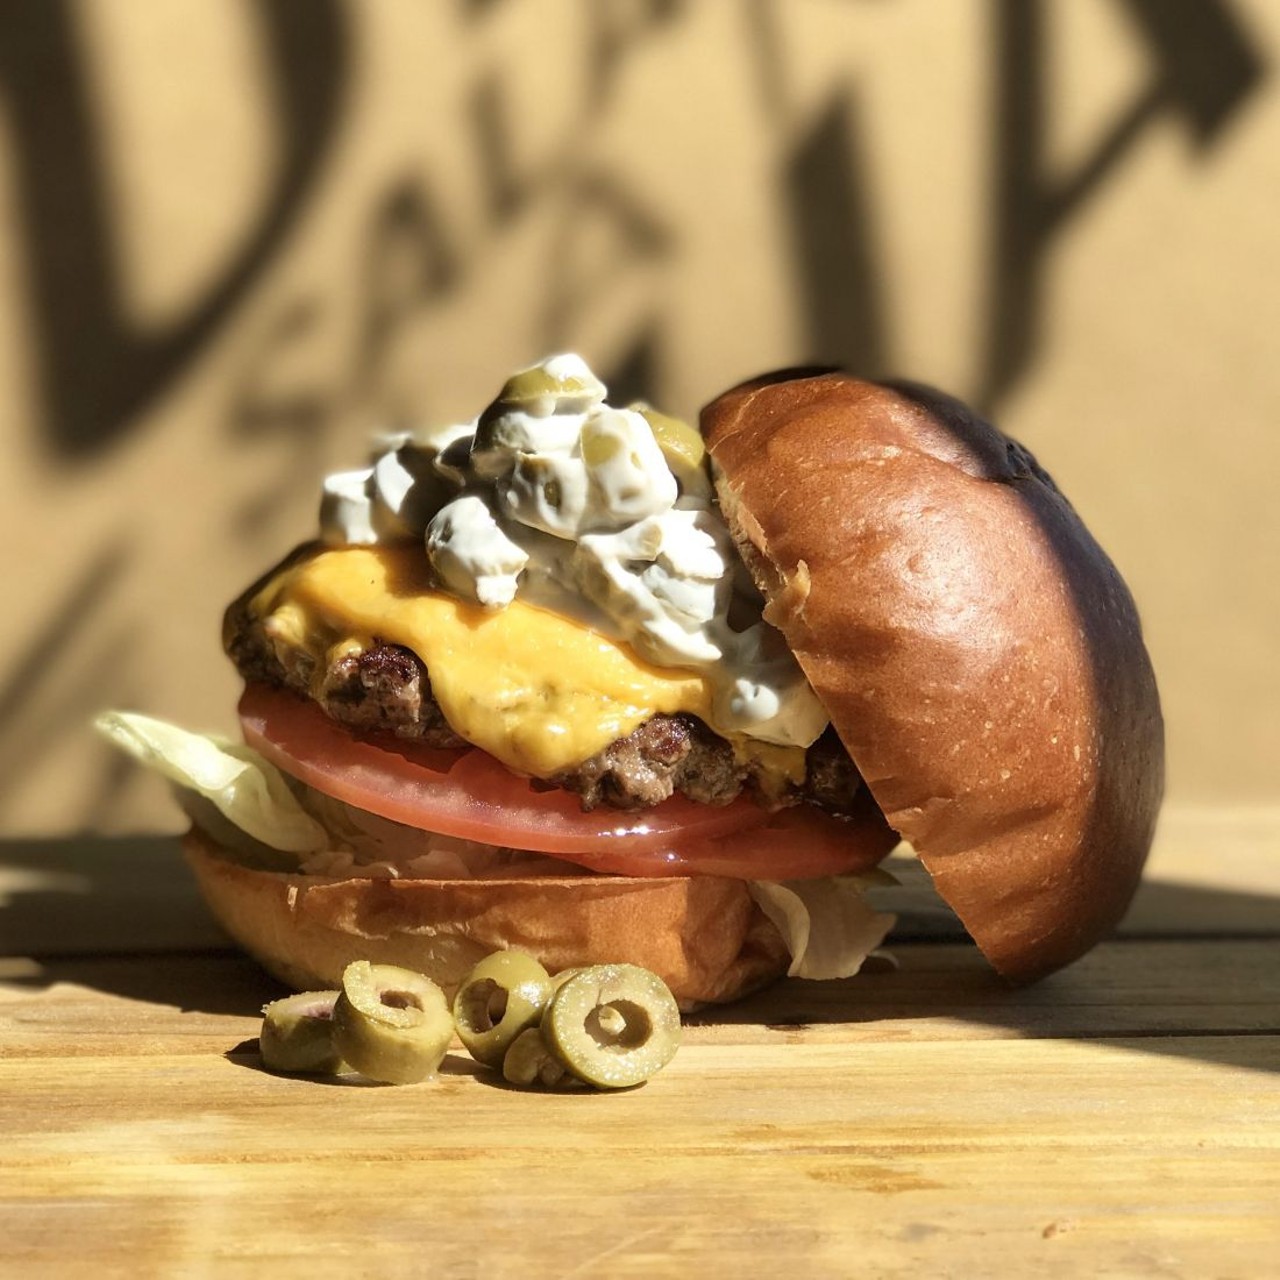 Here are all the burgers you'll find at Burger Battle Detroit 2017